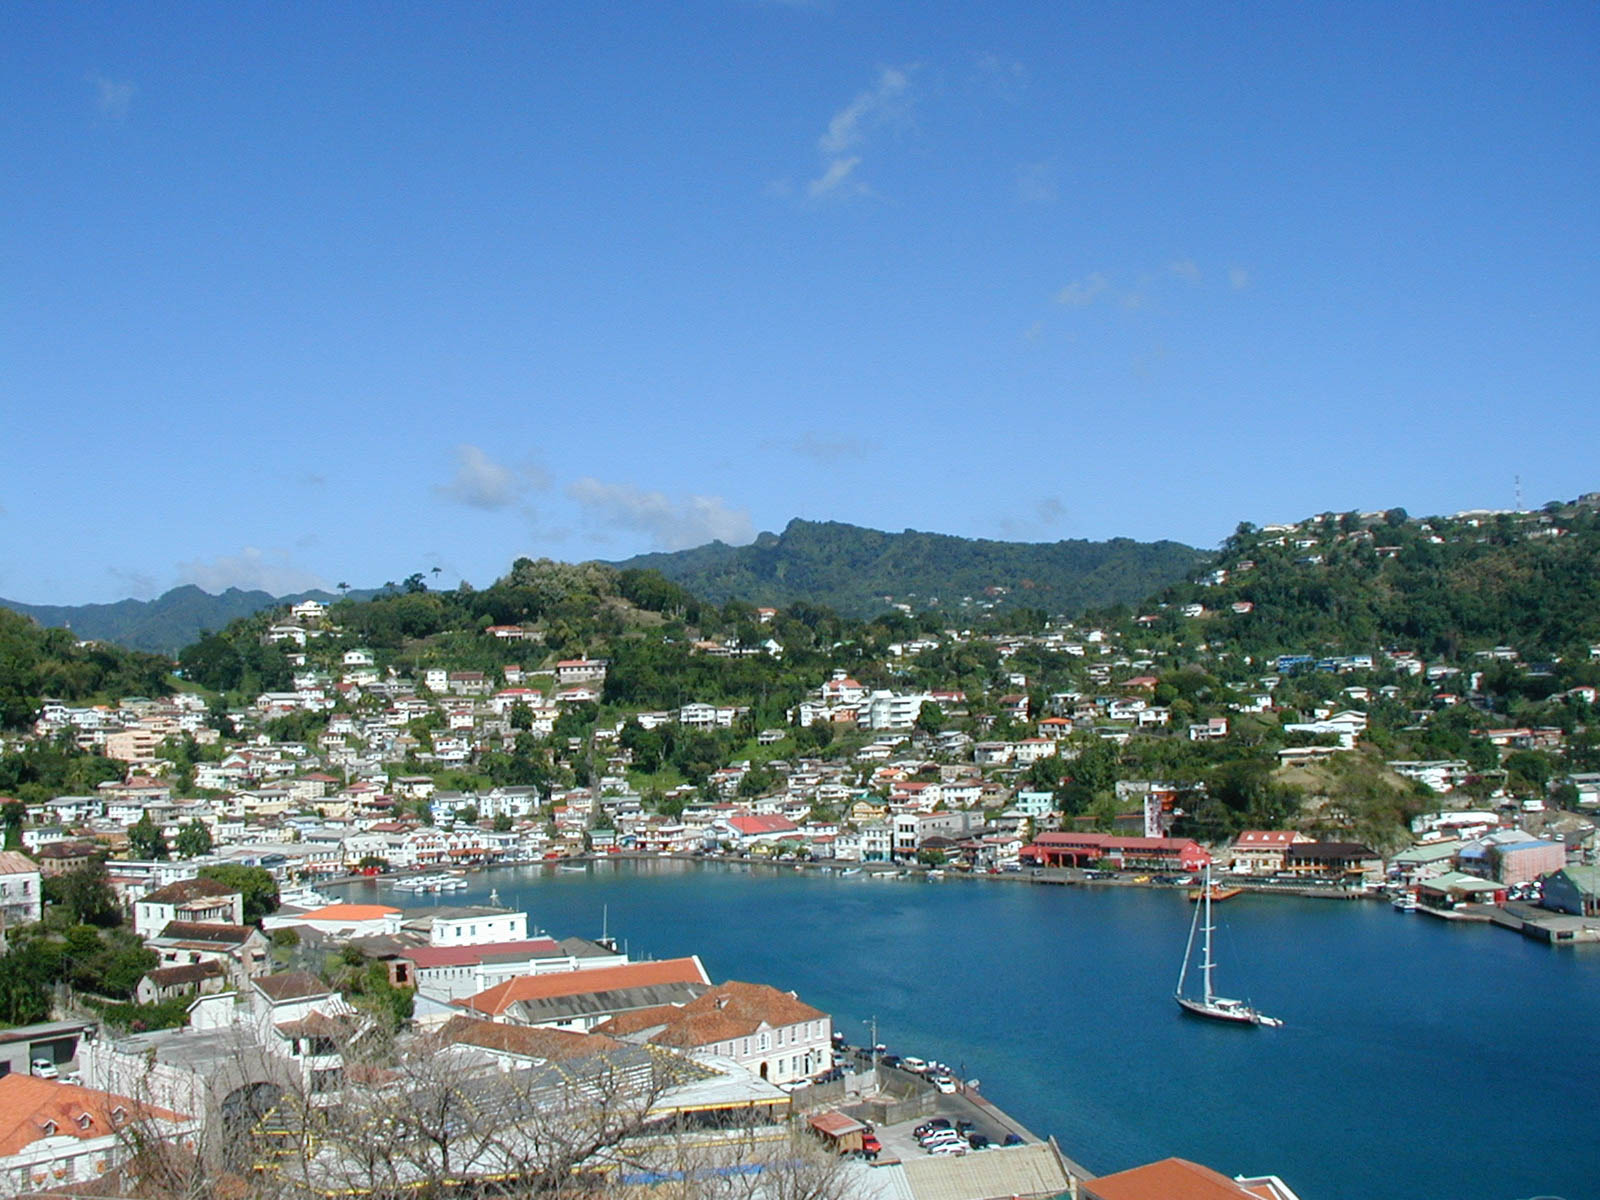 Can Building Resilient Coral Coastlines Help Protect Grenada?